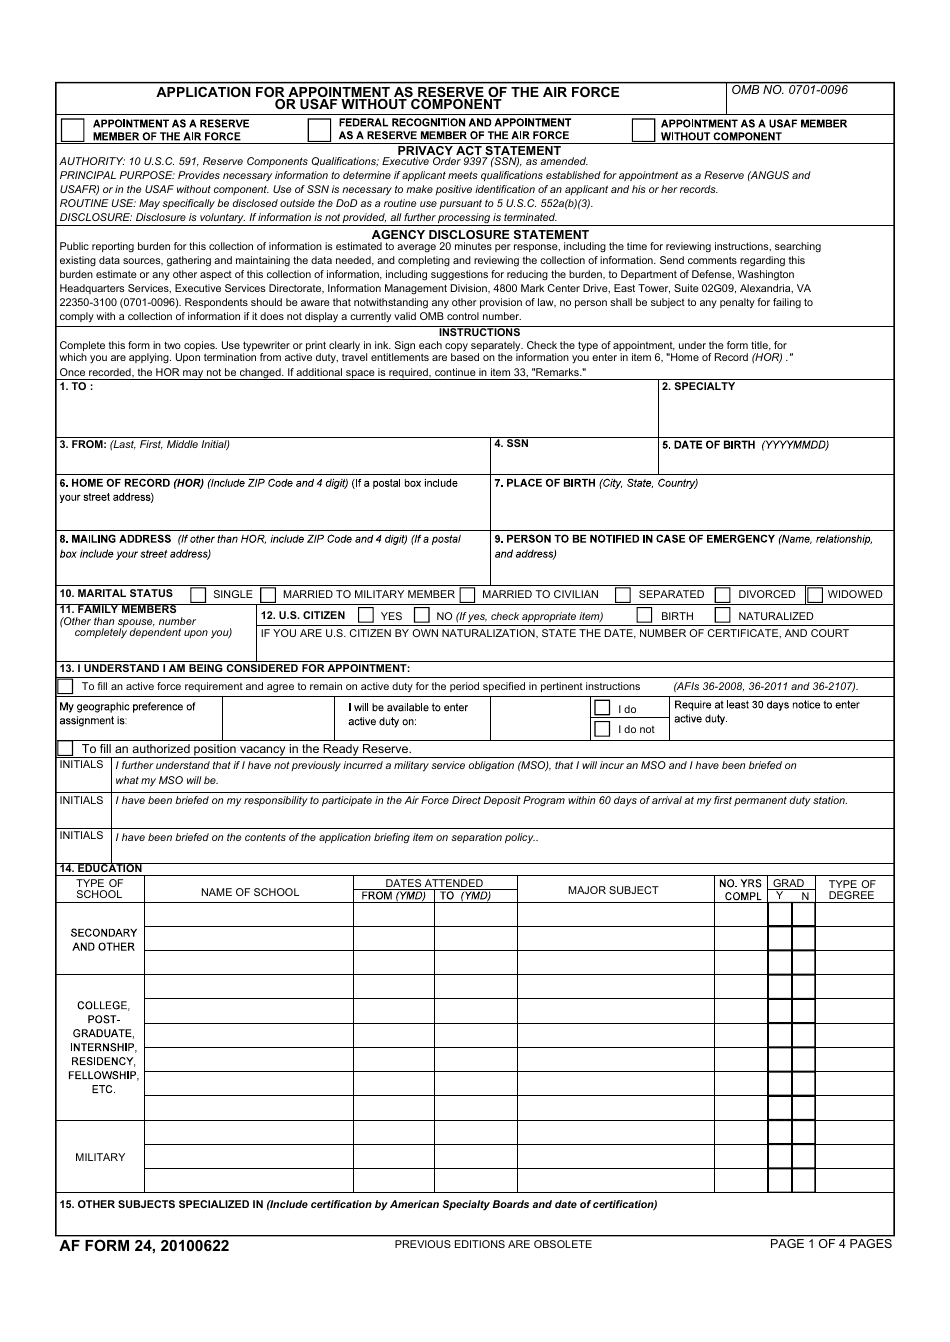 AF Form 24 Application for Appointment as Reserve of the Air Force or USAF Without Component, Page 1